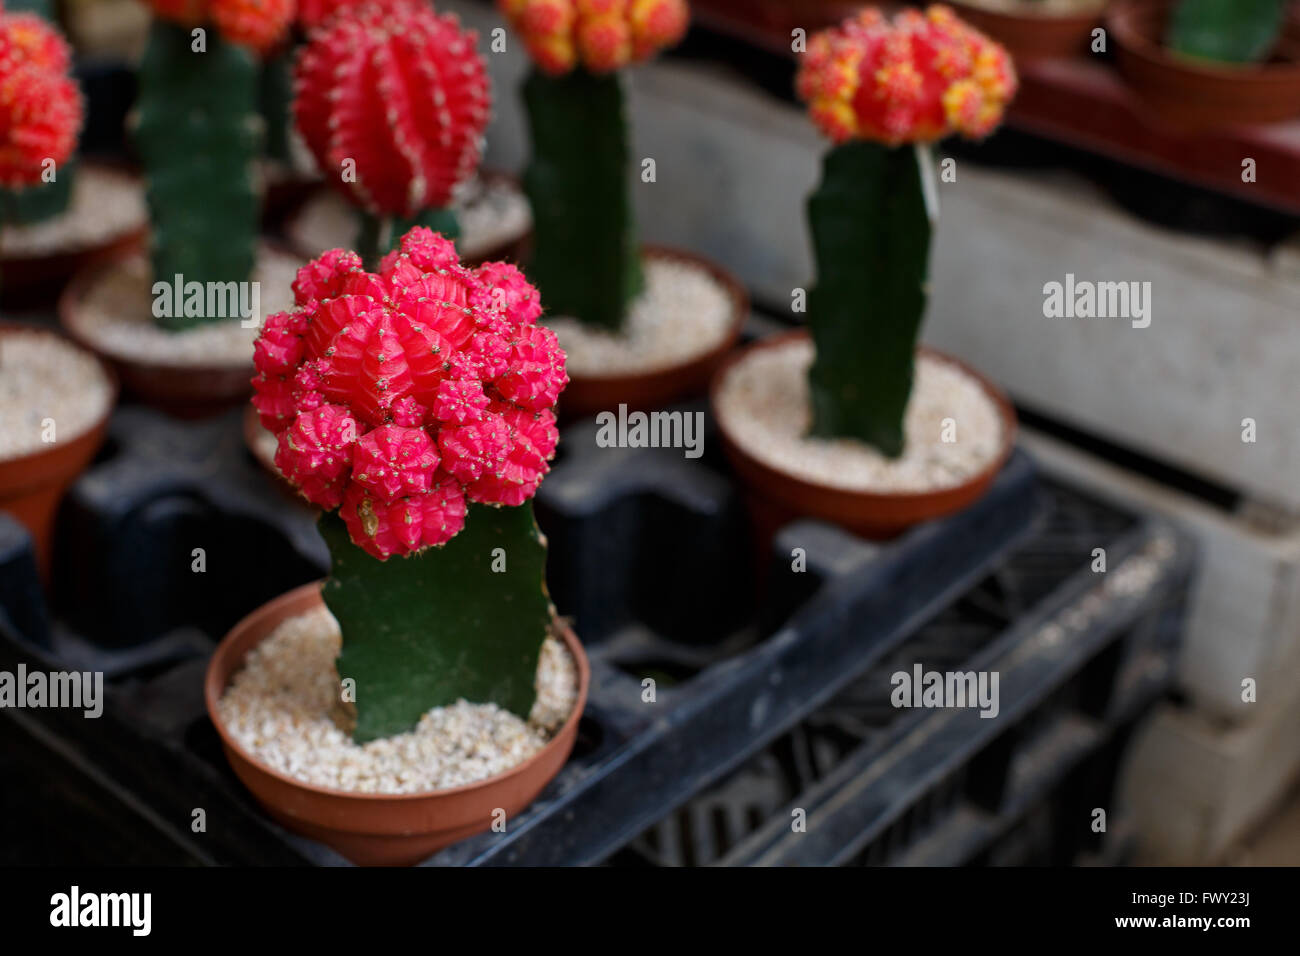 Cactus in pot.Gymnocalycium mihanovichii (red cactus),Anacampseros (cactus in front of red cactus),Mammillaria elongata (cactus beside red cactus) and Torch Thiste (cactus right in the picture) Stock Photo